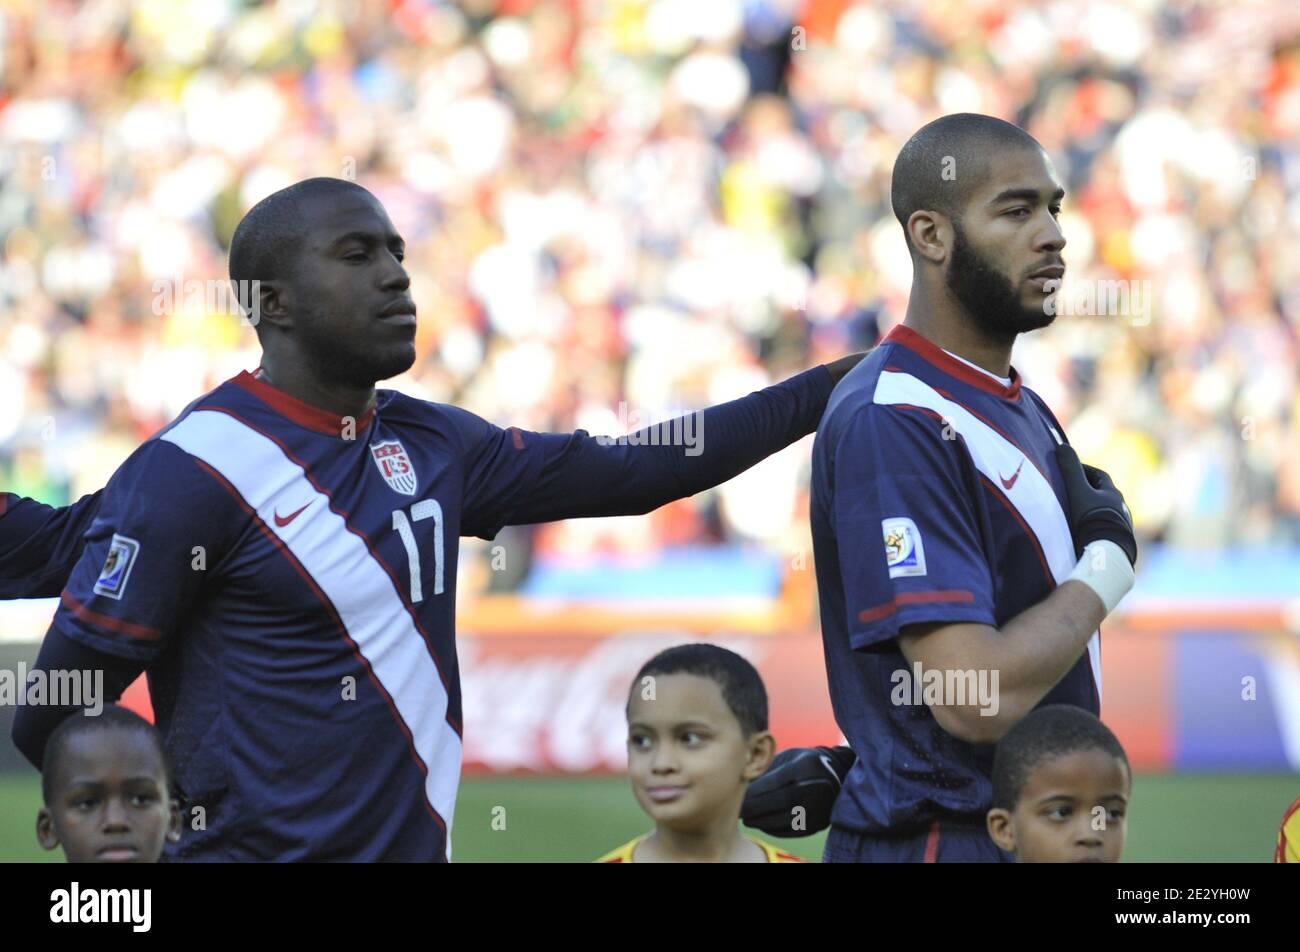 USA's Jozy Altidore and Oguchi Onyewu during the national anthem during the 2010 FIFA World Cup soccer match, Group C, Slovenia vs USA at Ellis Park Stadium, in Johannesburg, South Africa on June 18, 2010. The match ended in a 2-2 draw. Photo by Christophe Guibbaud/Cameleon/ABACAPRESS.COM Stock Photo